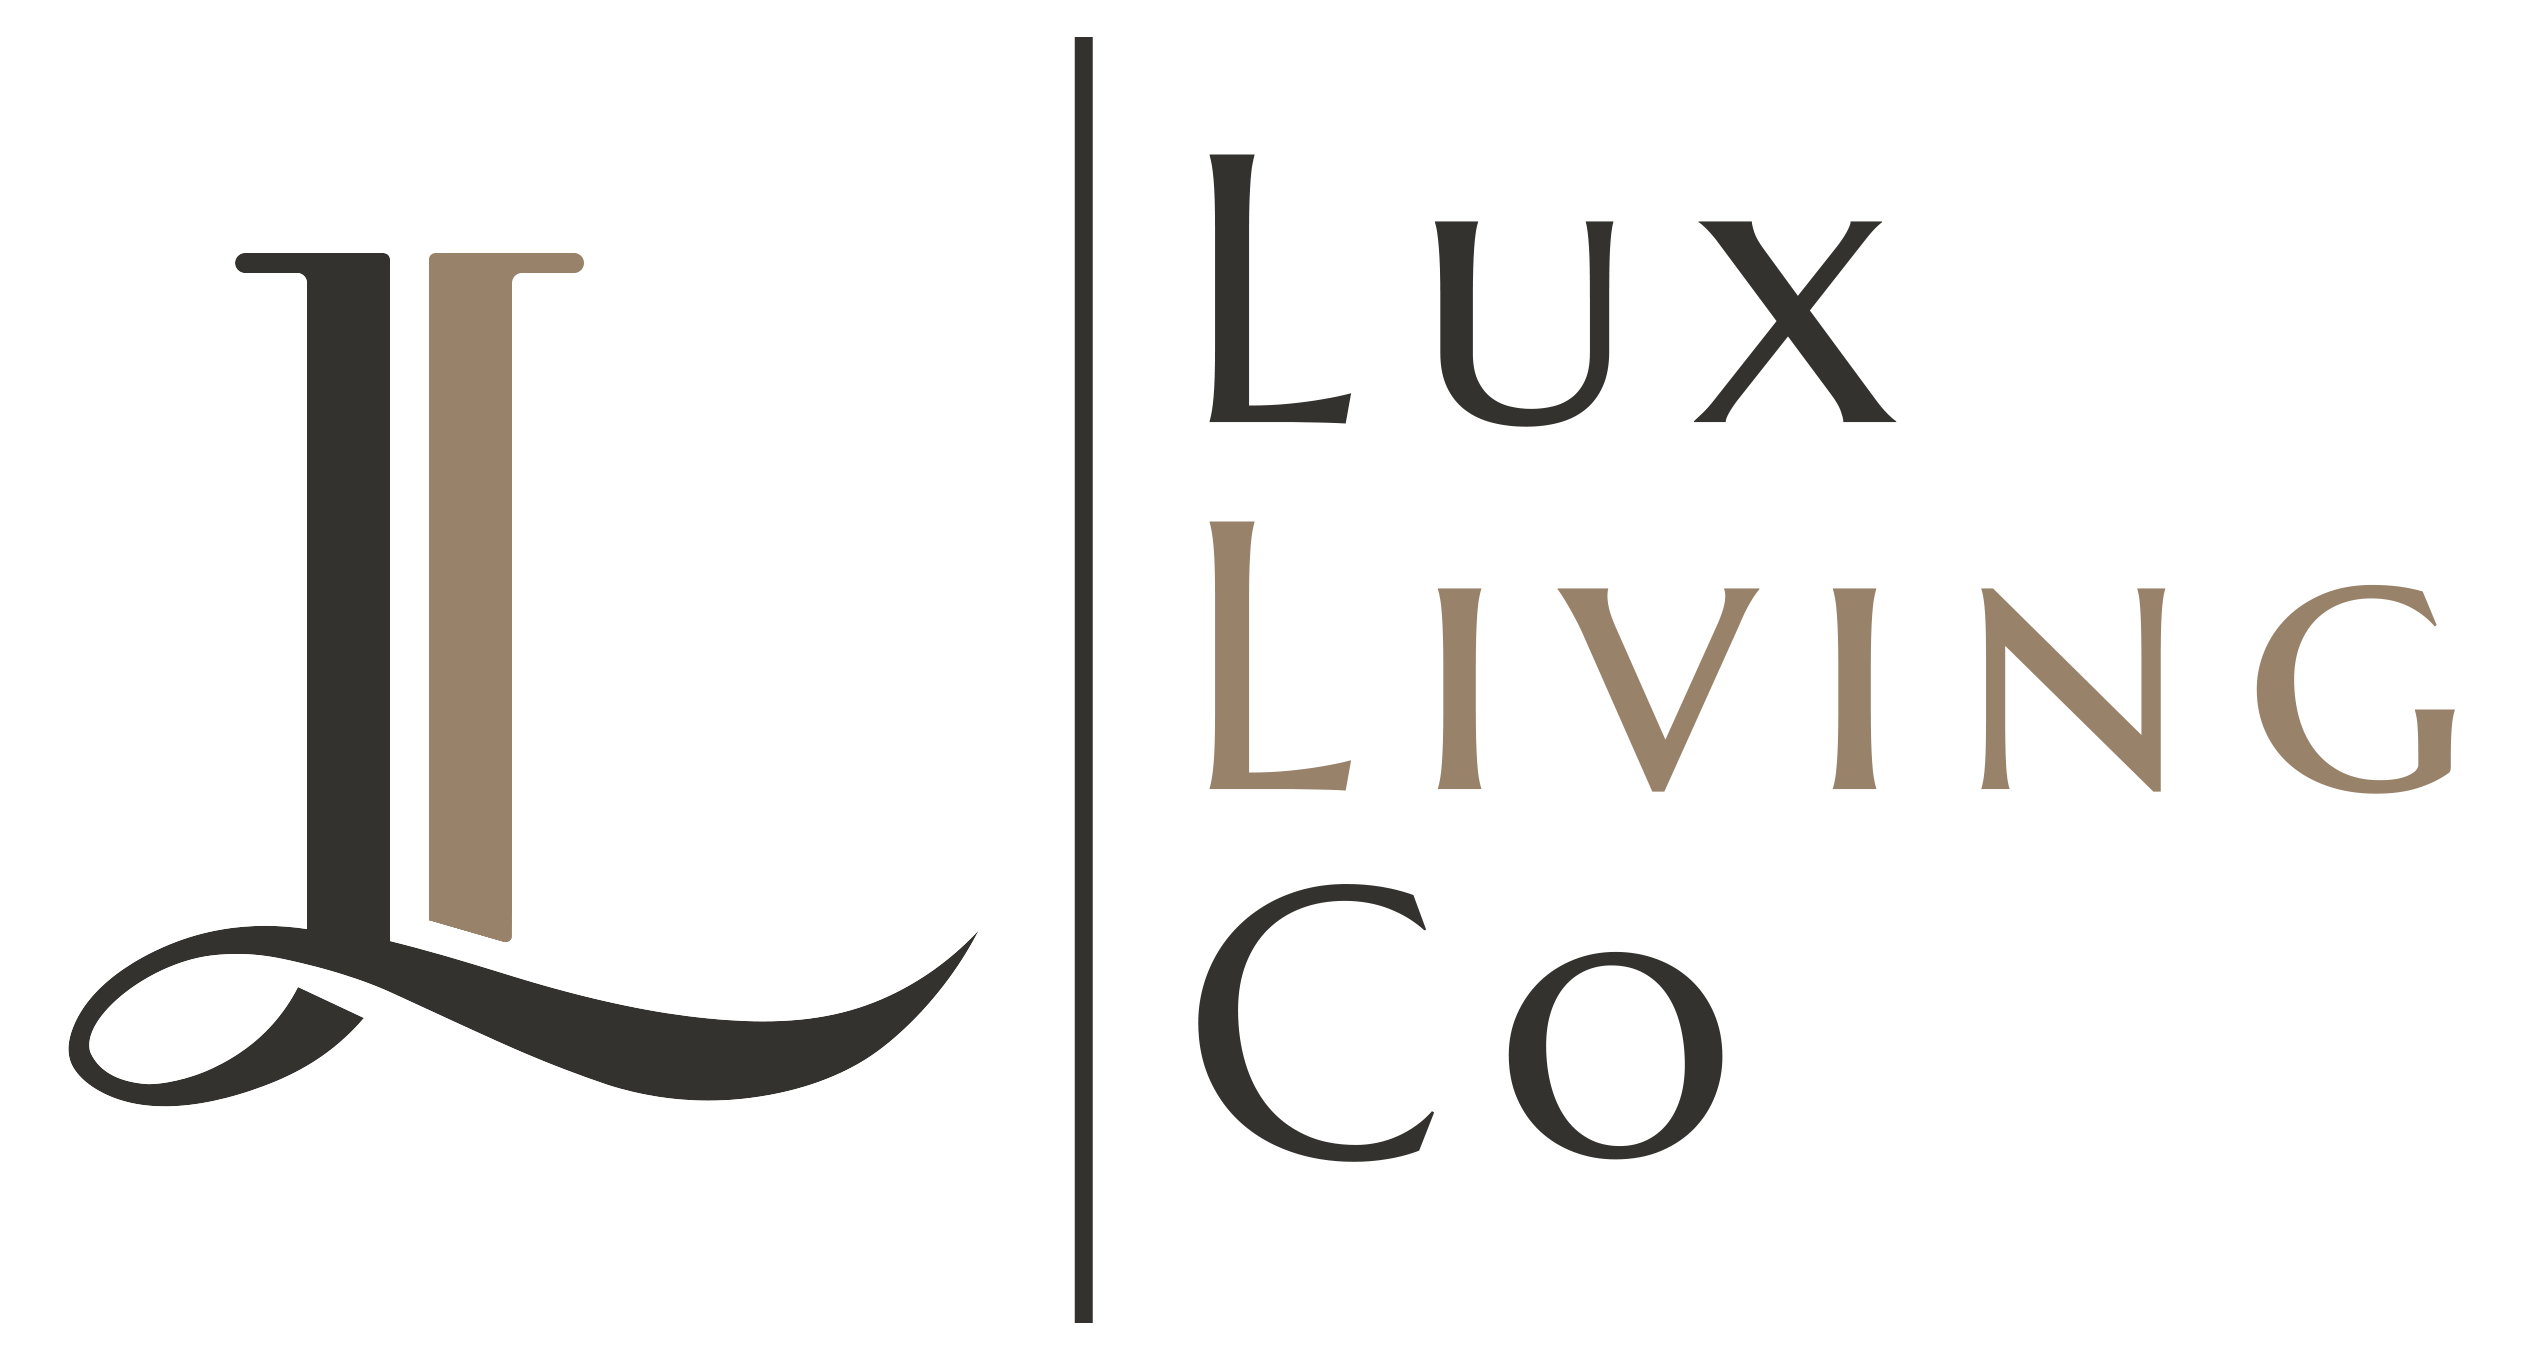 Lux Living Co